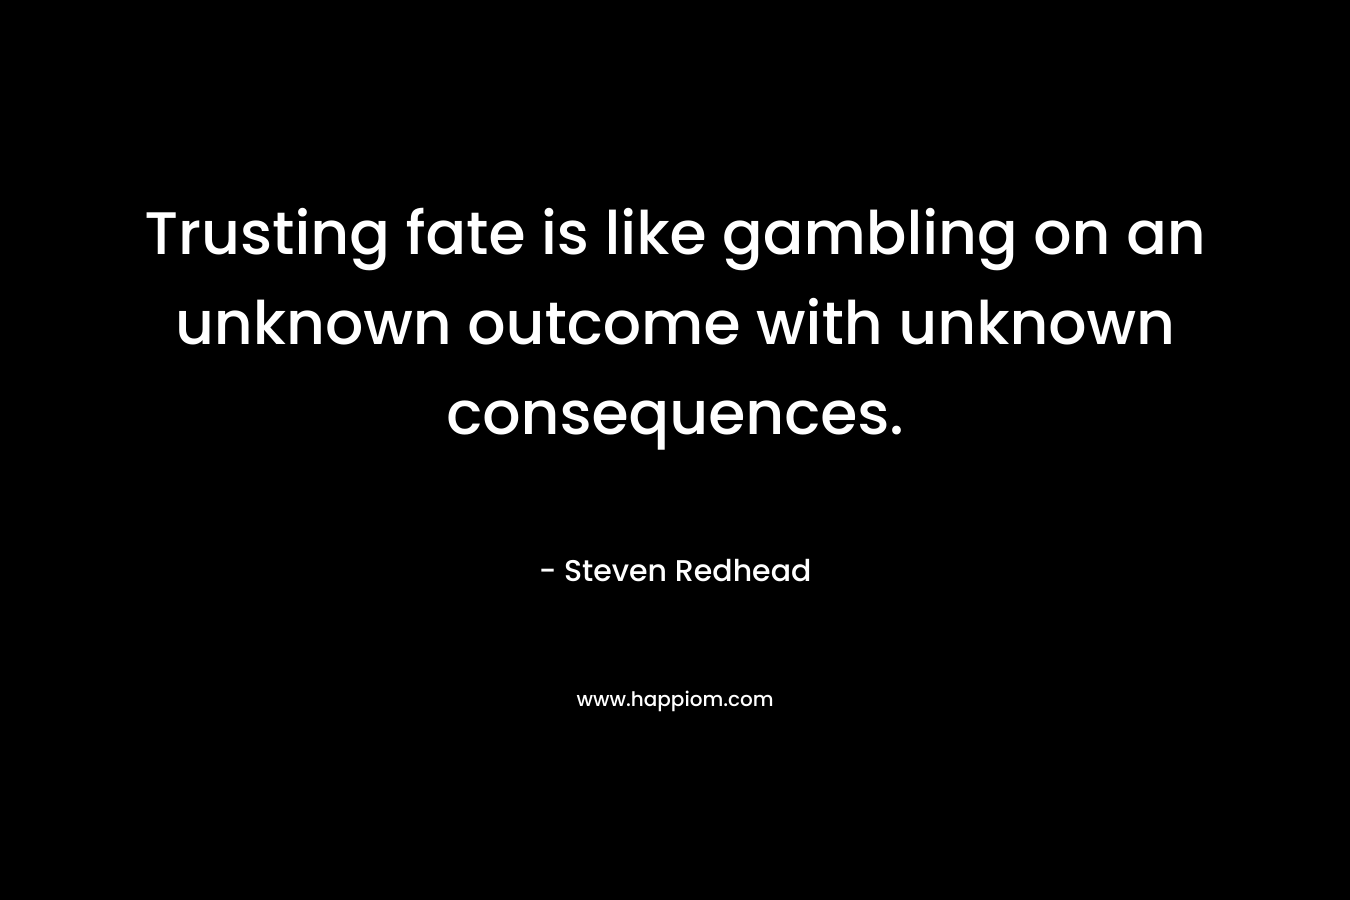 Trusting fate is like gambling on an unknown outcome with unknown consequences. – Steven Redhead